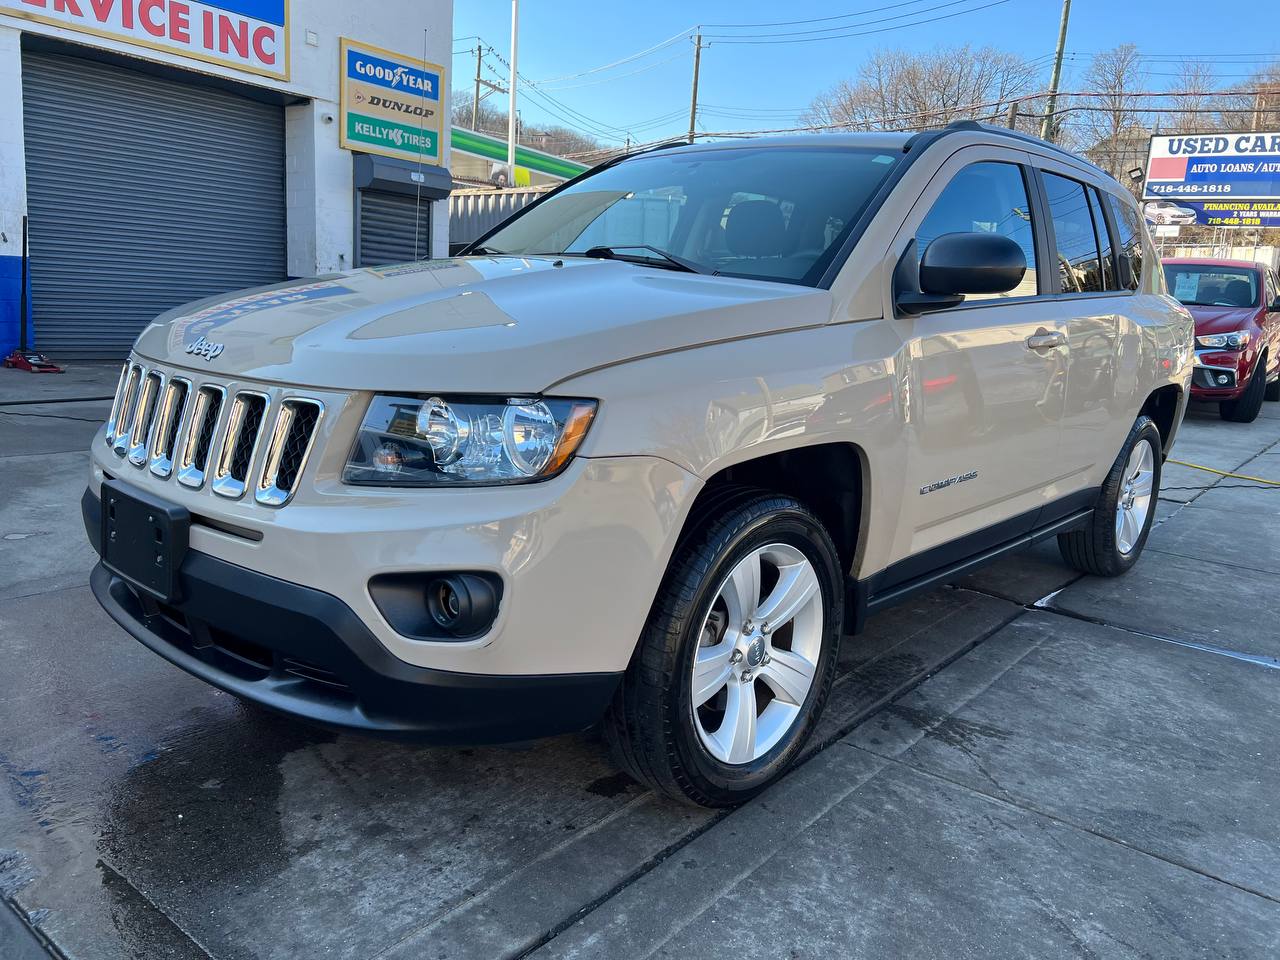 Used Car - 2017 Jeep Compass Sport for Sale in Staten Island, NY